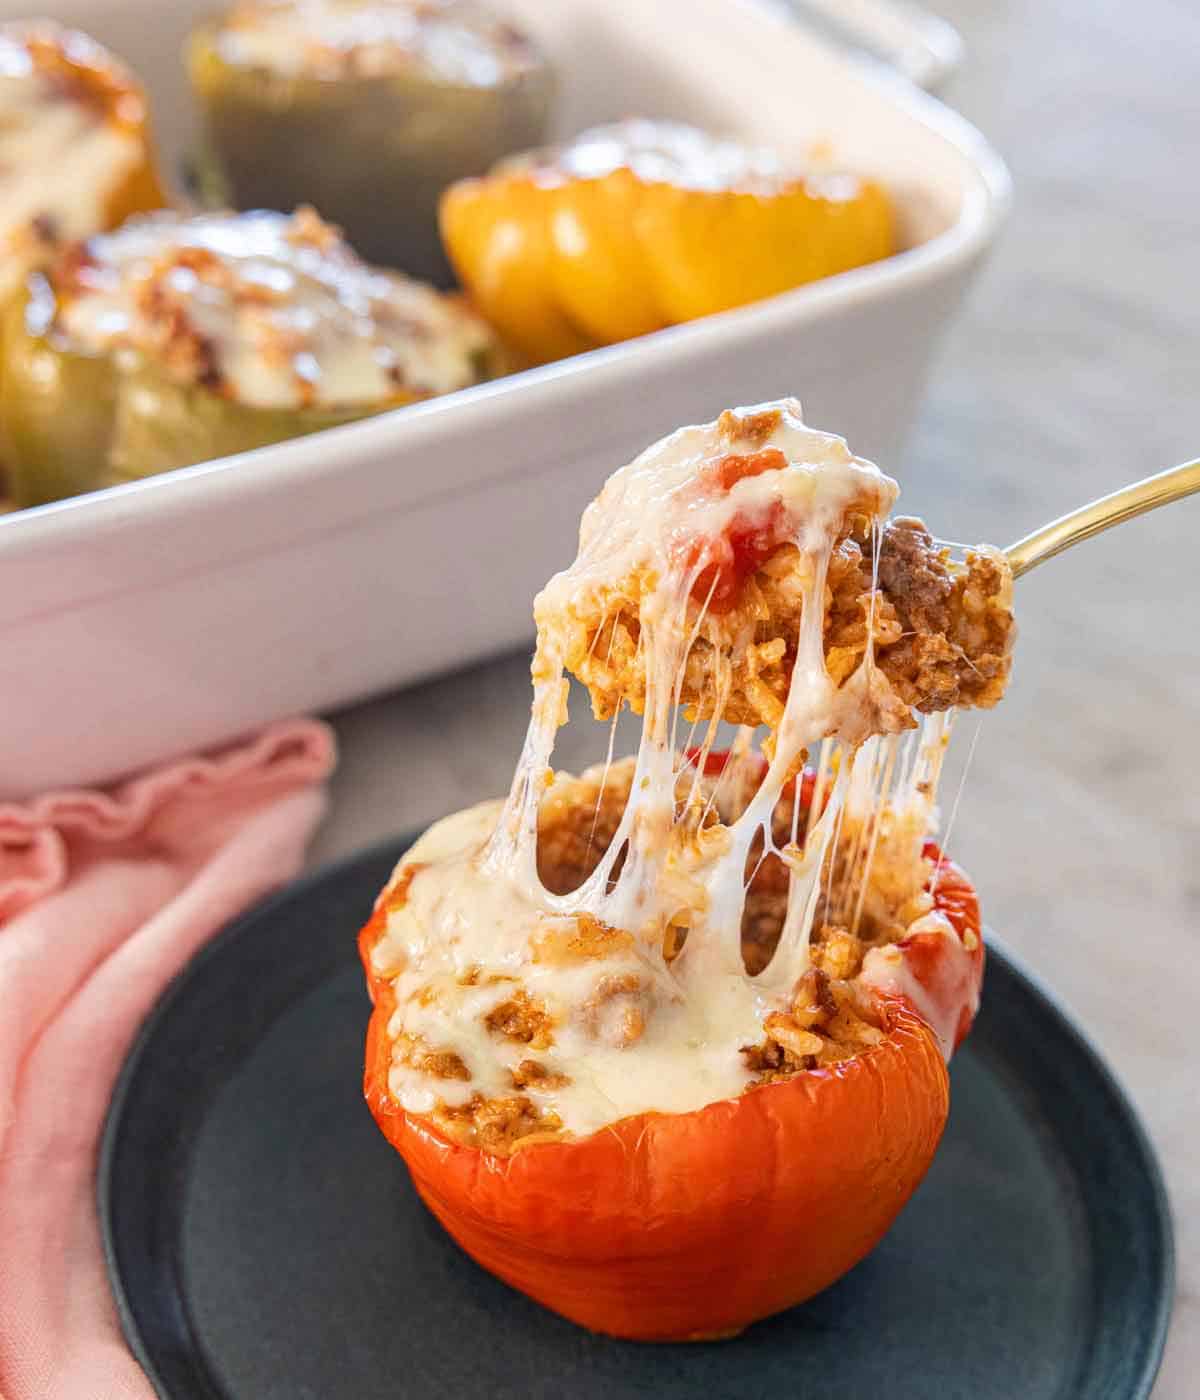 A plate with a forkful of filling lifted up from a stuffed pepper with the melted cheese pulling away from the pepper.